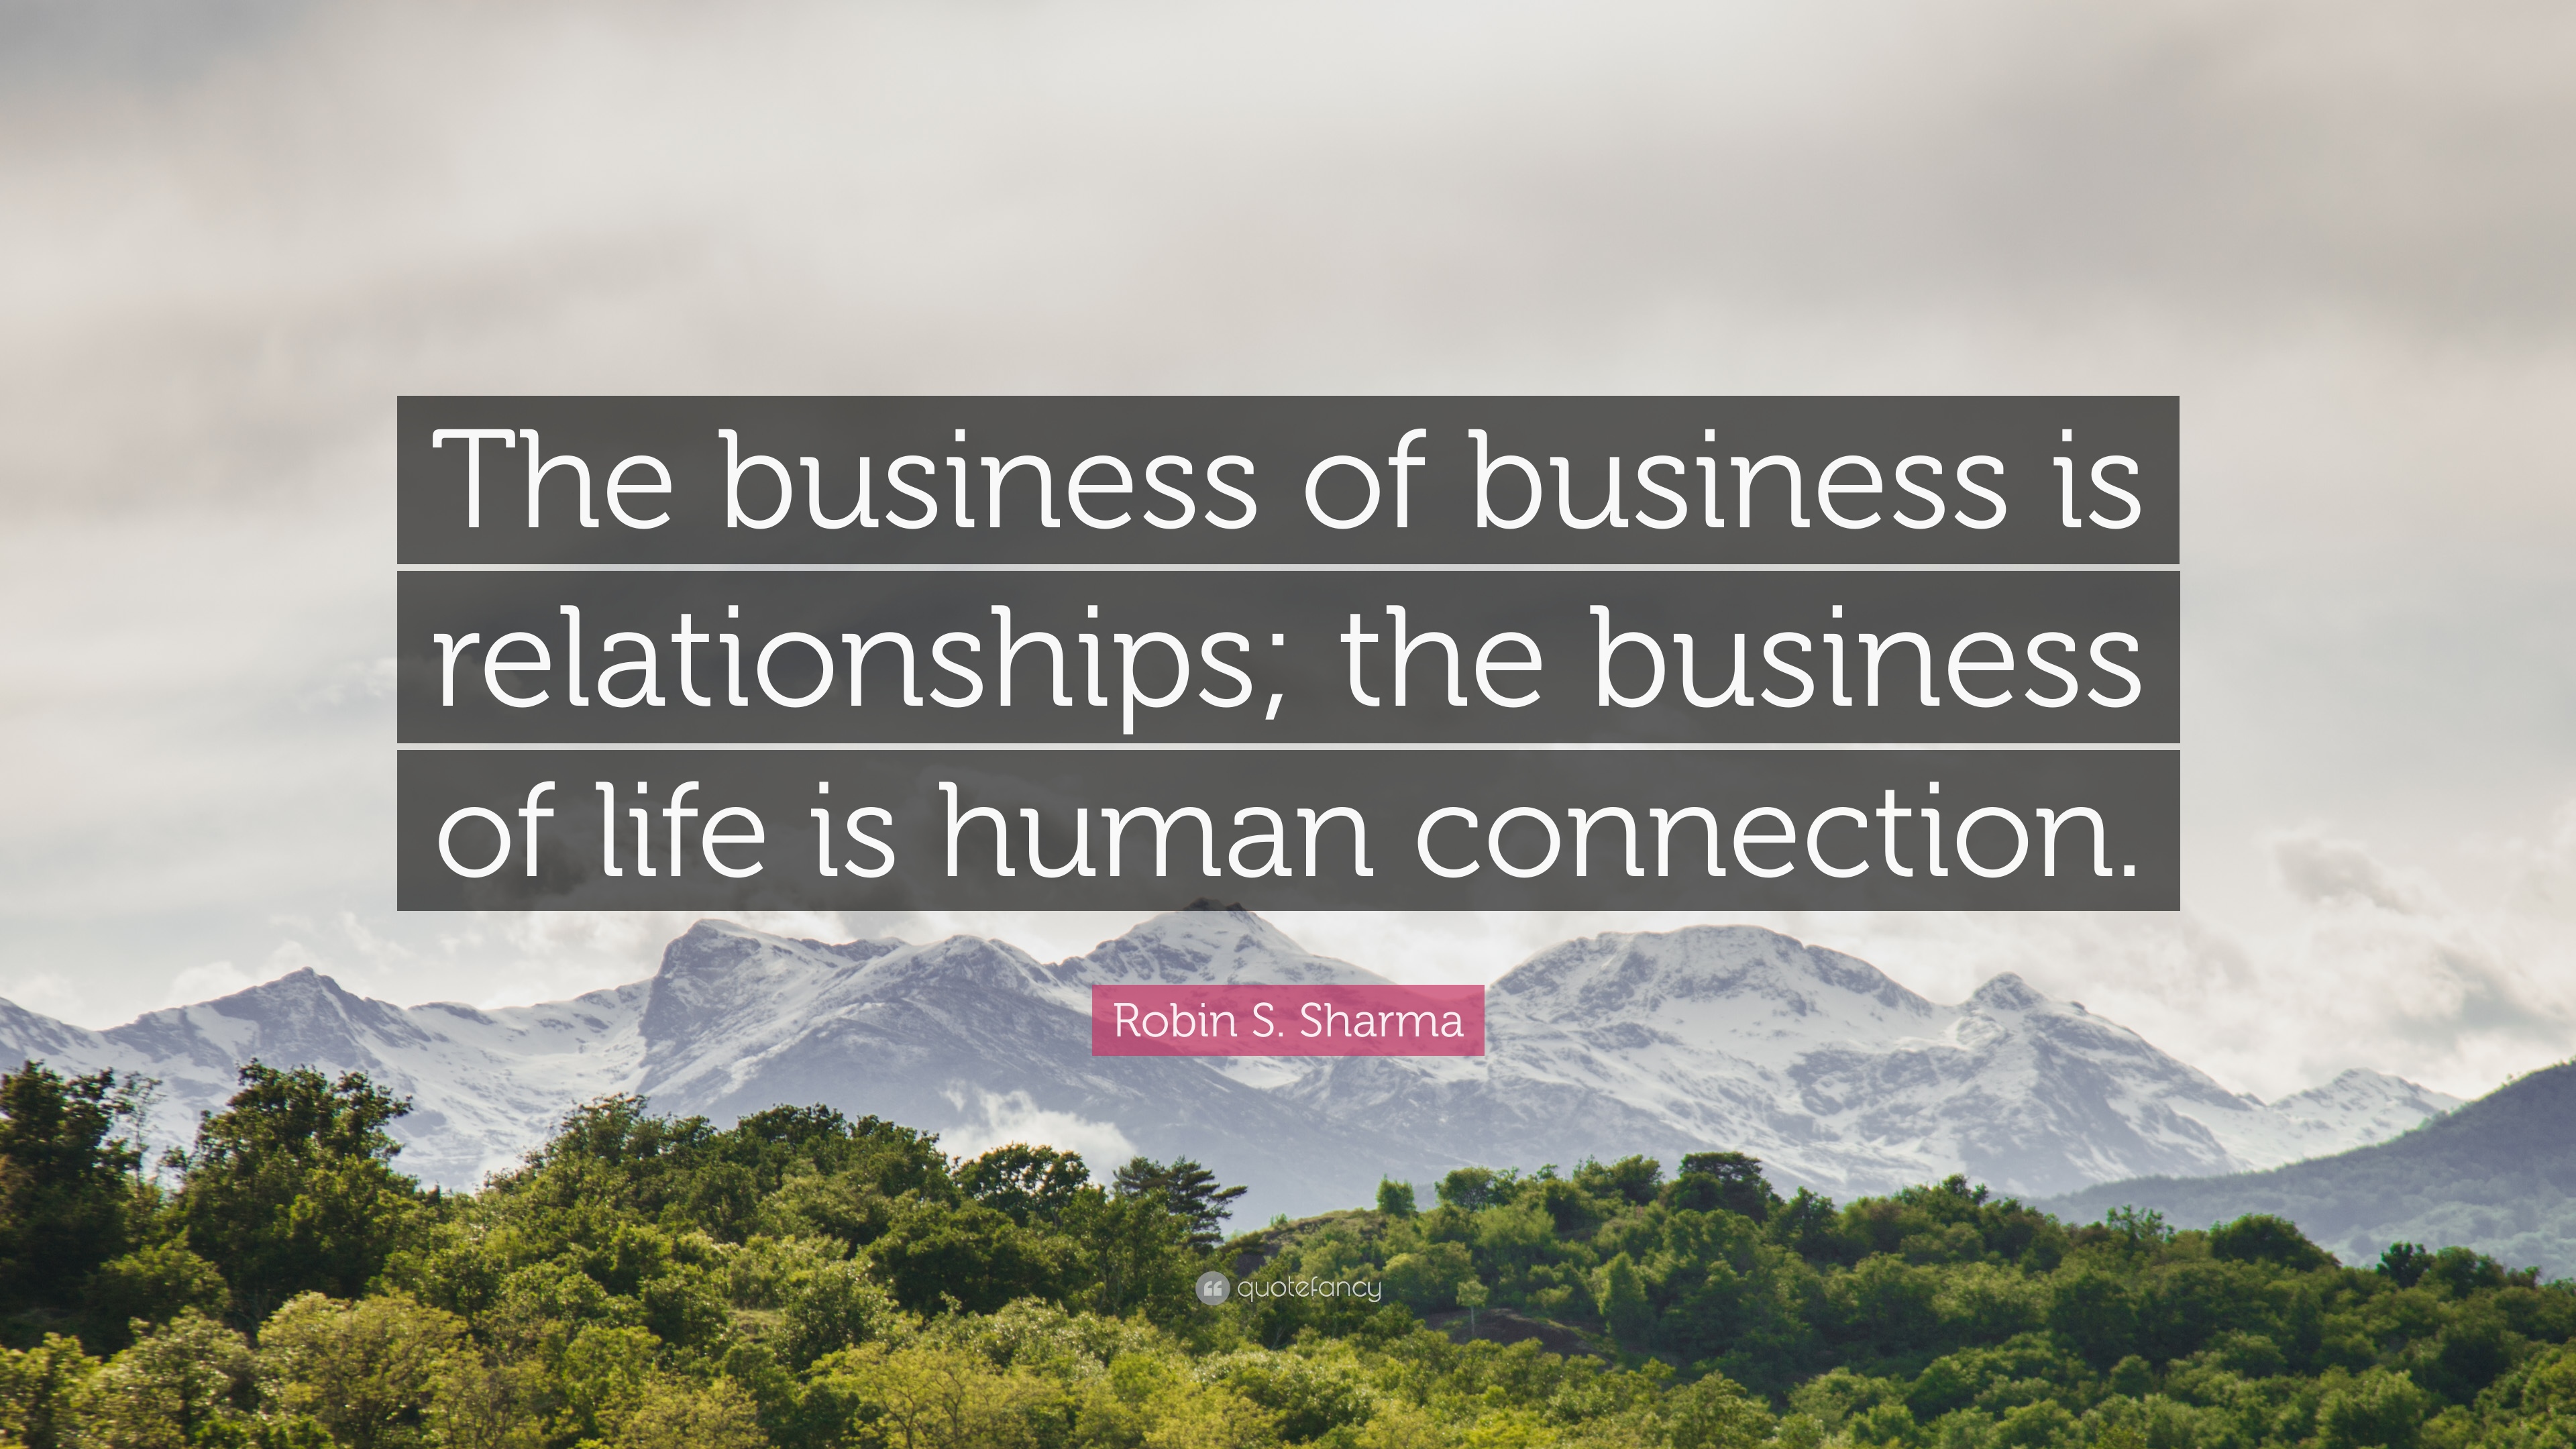 service-page-pic-the-business-of-business-is-relationships-the